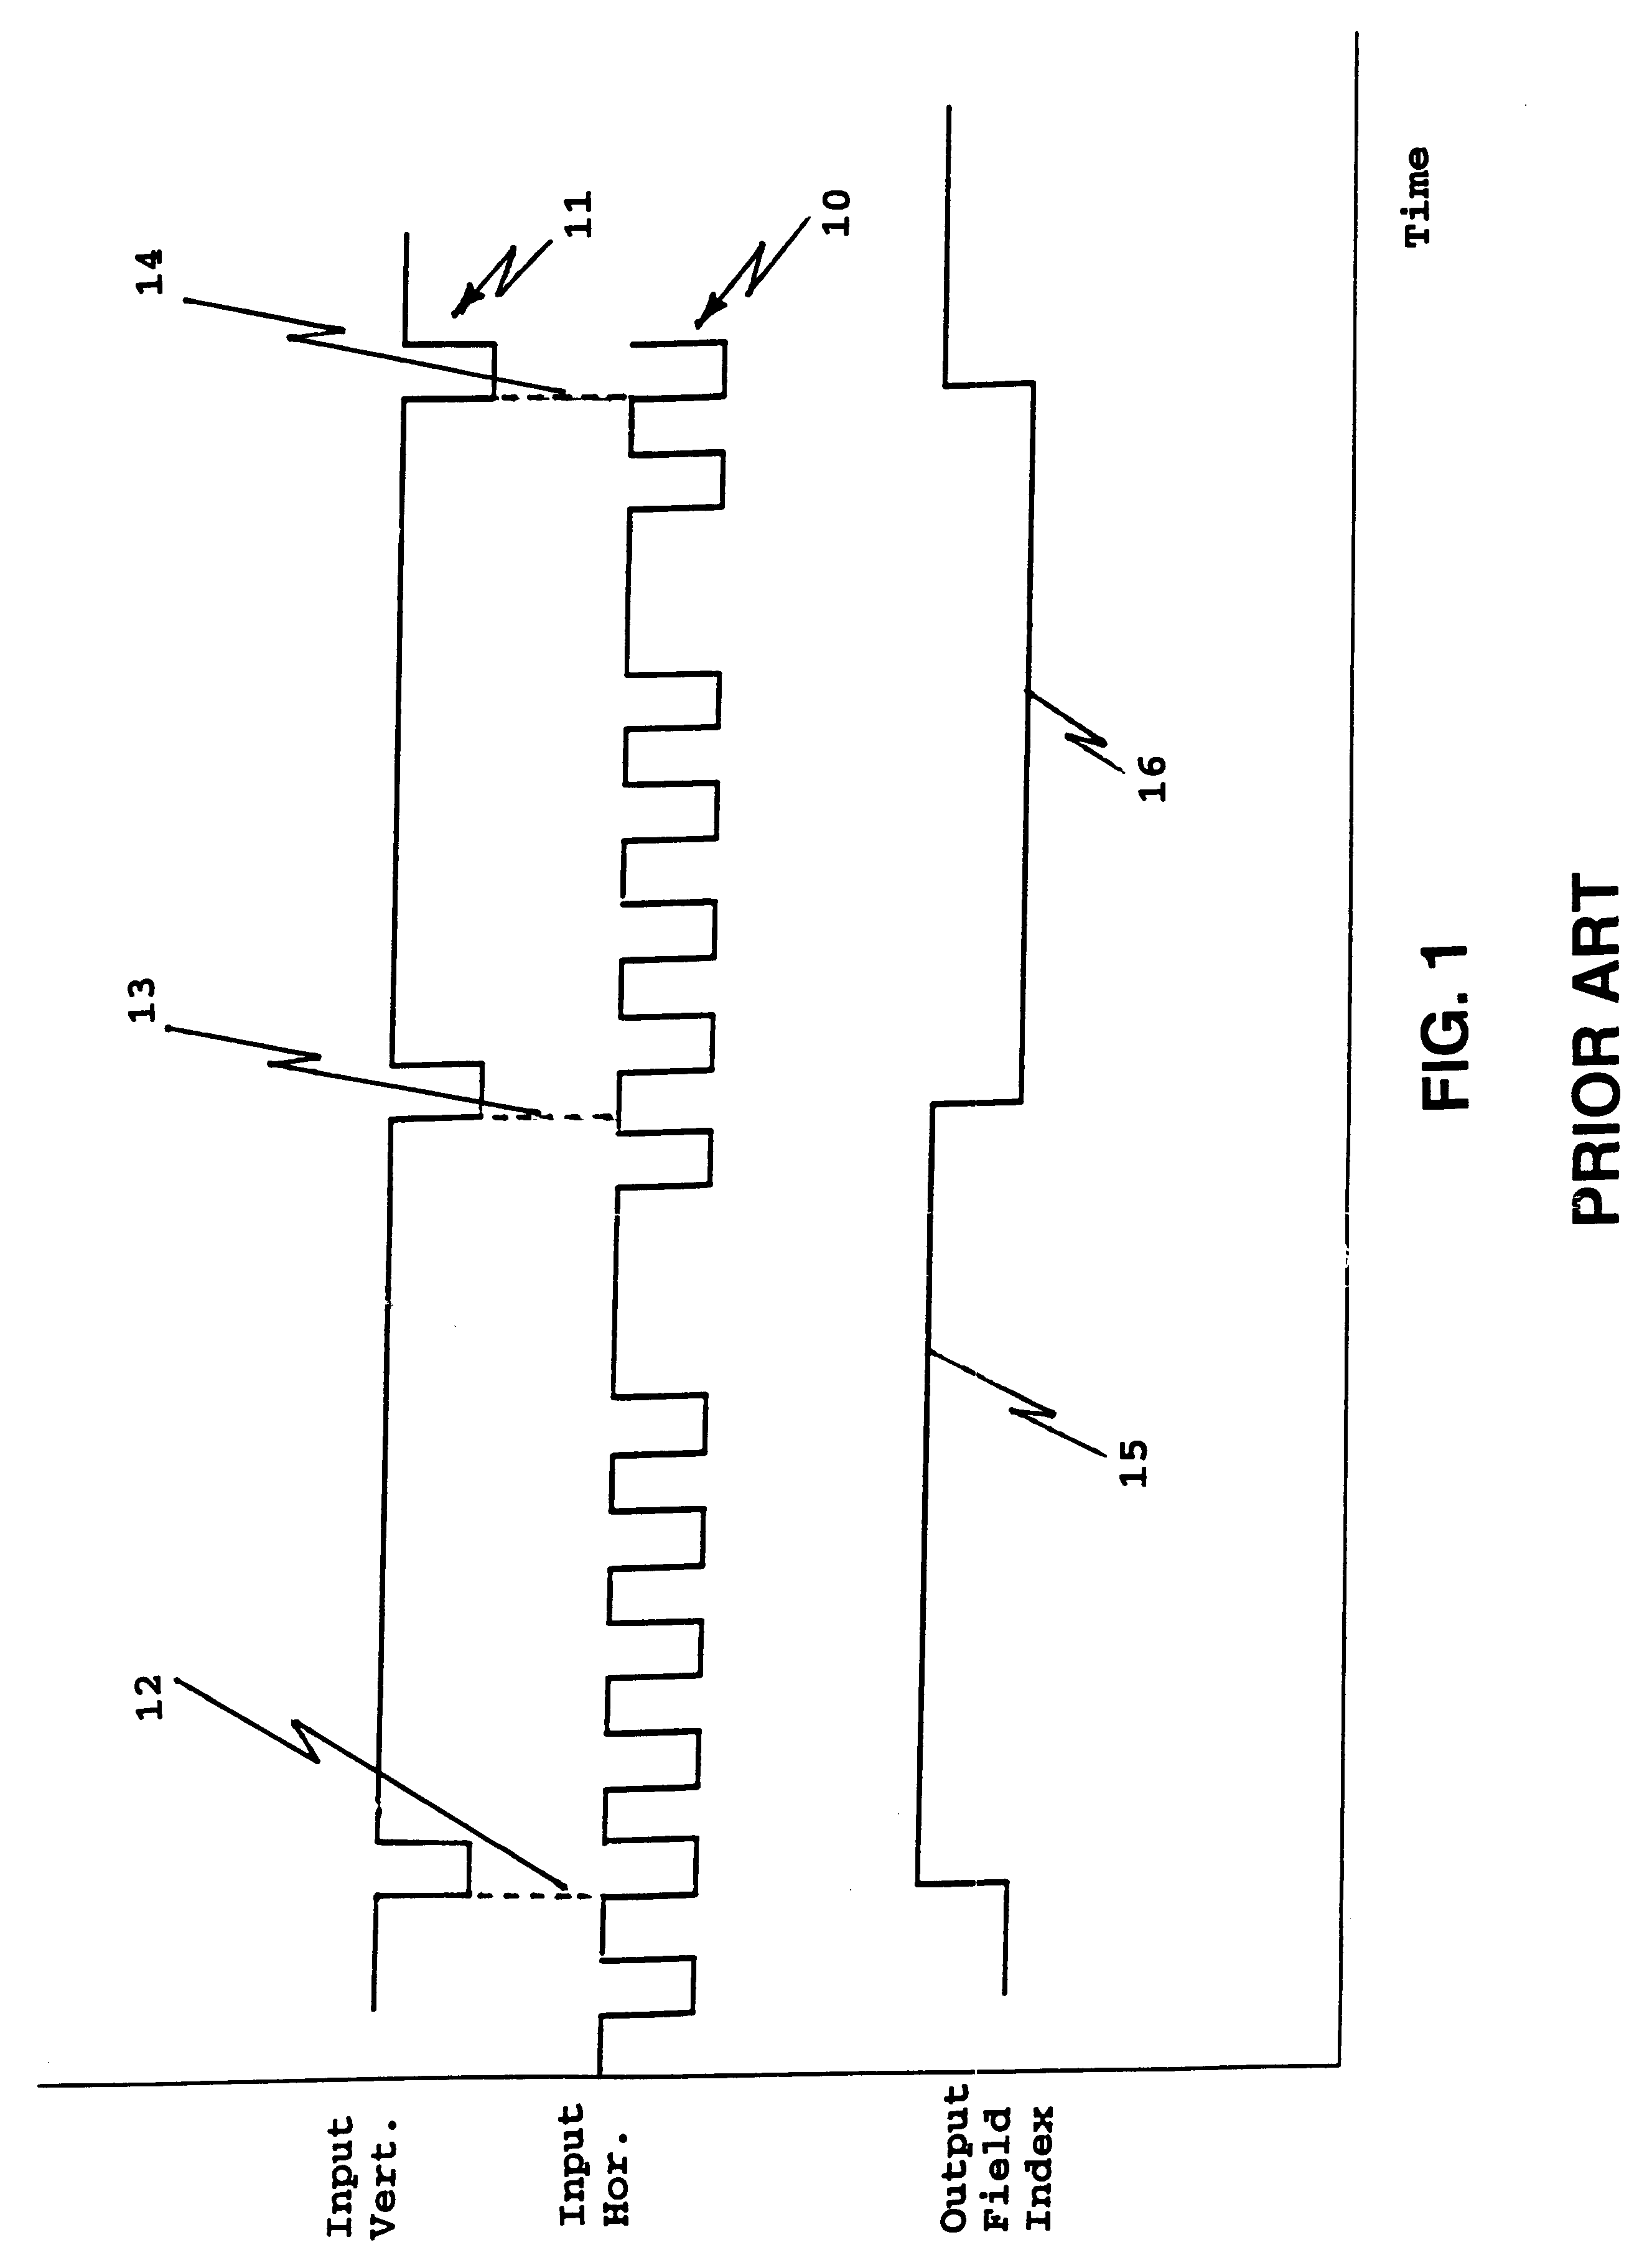 Field synchronization system and technique